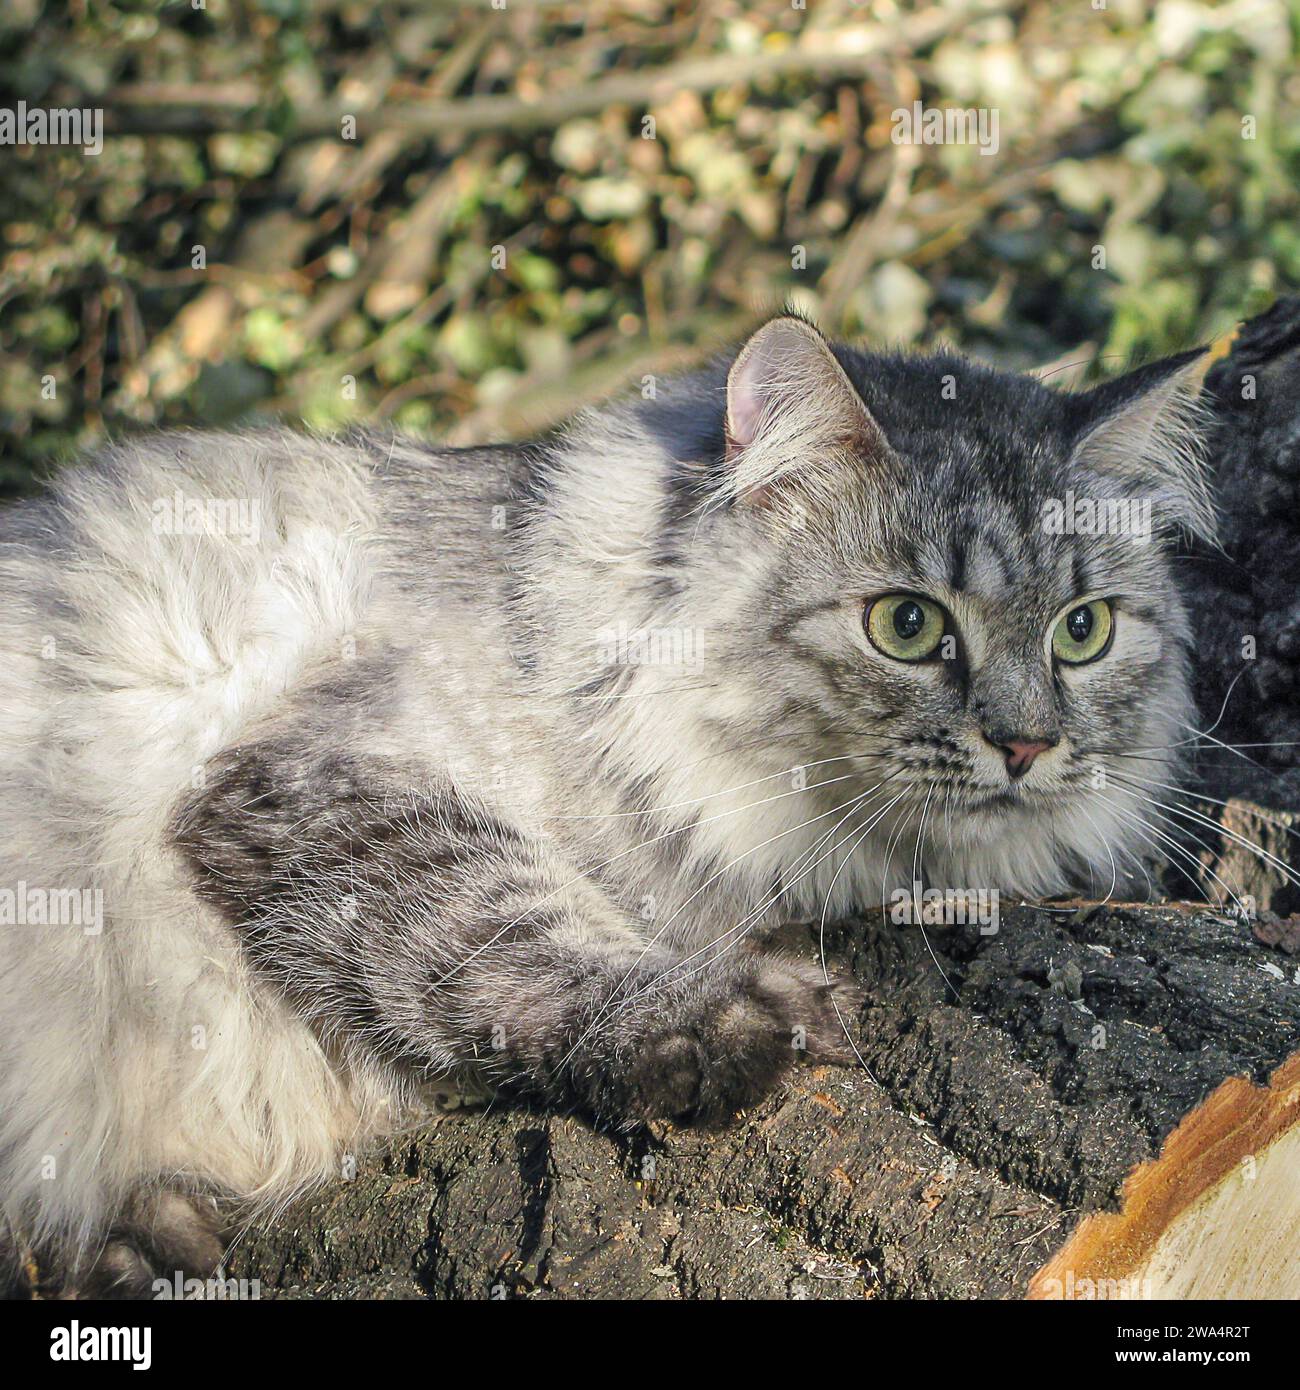 Adorable fluffy grey domestic cat with long whiskers in the forest Stock Photo